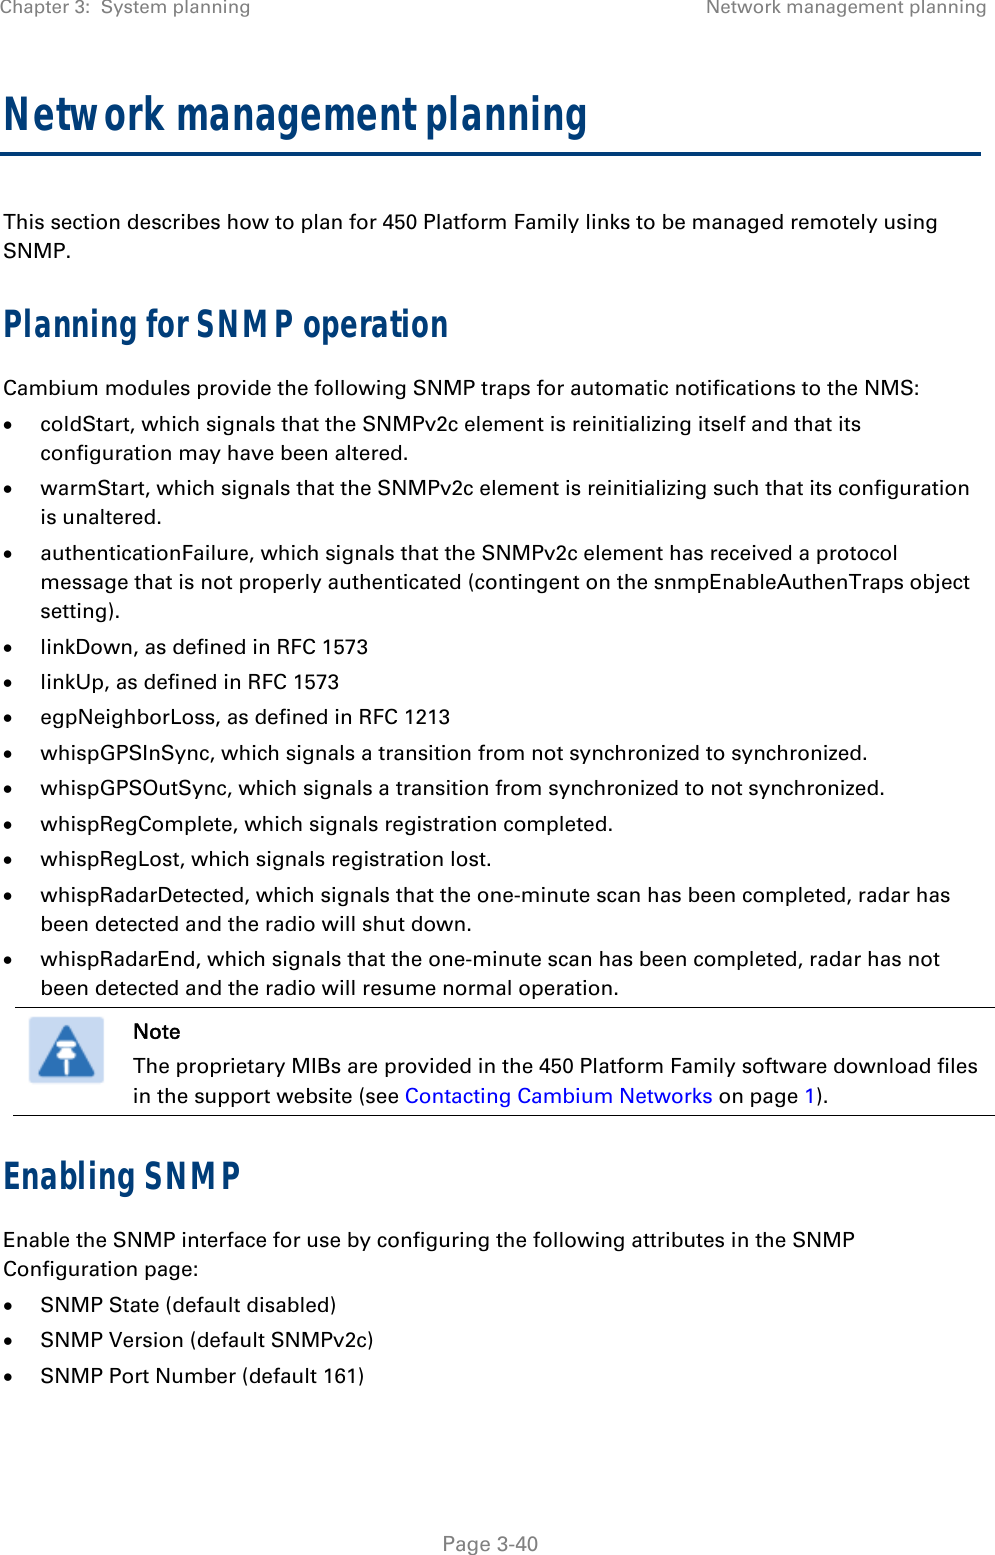 Chapter 3:  System planning  Network management planning   Page 3-40 Network management planning This section describes how to plan for 450 Platform Family links to be managed remotely using SNMP. Planning for SNMP operation Cambium modules provide the following SNMP traps for automatic notifications to the NMS:  coldStart, which signals that the SNMPv2c element is reinitializing itself and that its configuration may have been altered.  warmStart, which signals that the SNMPv2c element is reinitializing such that its configuration is unaltered.  authenticationFailure, which signals that the SNMPv2c element has received a protocol message that is not properly authenticated (contingent on the snmpEnableAuthenTraps object setting).  linkDown, as defined in RFC 1573  linkUp, as defined in RFC 1573  egpNeighborLoss, as defined in RFC 1213  whispGPSInSync, which signals a transition from not synchronized to synchronized.  whispGPSOutSync, which signals a transition from synchronized to not synchronized.  whispRegComplete, which signals registration completed.   whispRegLost, which signals registration lost.   whispRadarDetected, which signals that the one-minute scan has been completed, radar has been detected and the radio will shut down.   whispRadarEnd, which signals that the one-minute scan has been completed, radar has not been detected and the radio will resume normal operation.   Note The proprietary MIBs are provided in the 450 Platform Family software download files in the support website (see Contacting Cambium Networks on page 1). Enabling SNMP Enable the SNMP interface for use by configuring the following attributes in the SNMP Configuration page:  SNMP State (default disabled)  SNMP Version (default SNMPv2c)  SNMP Port Number (default 161) 